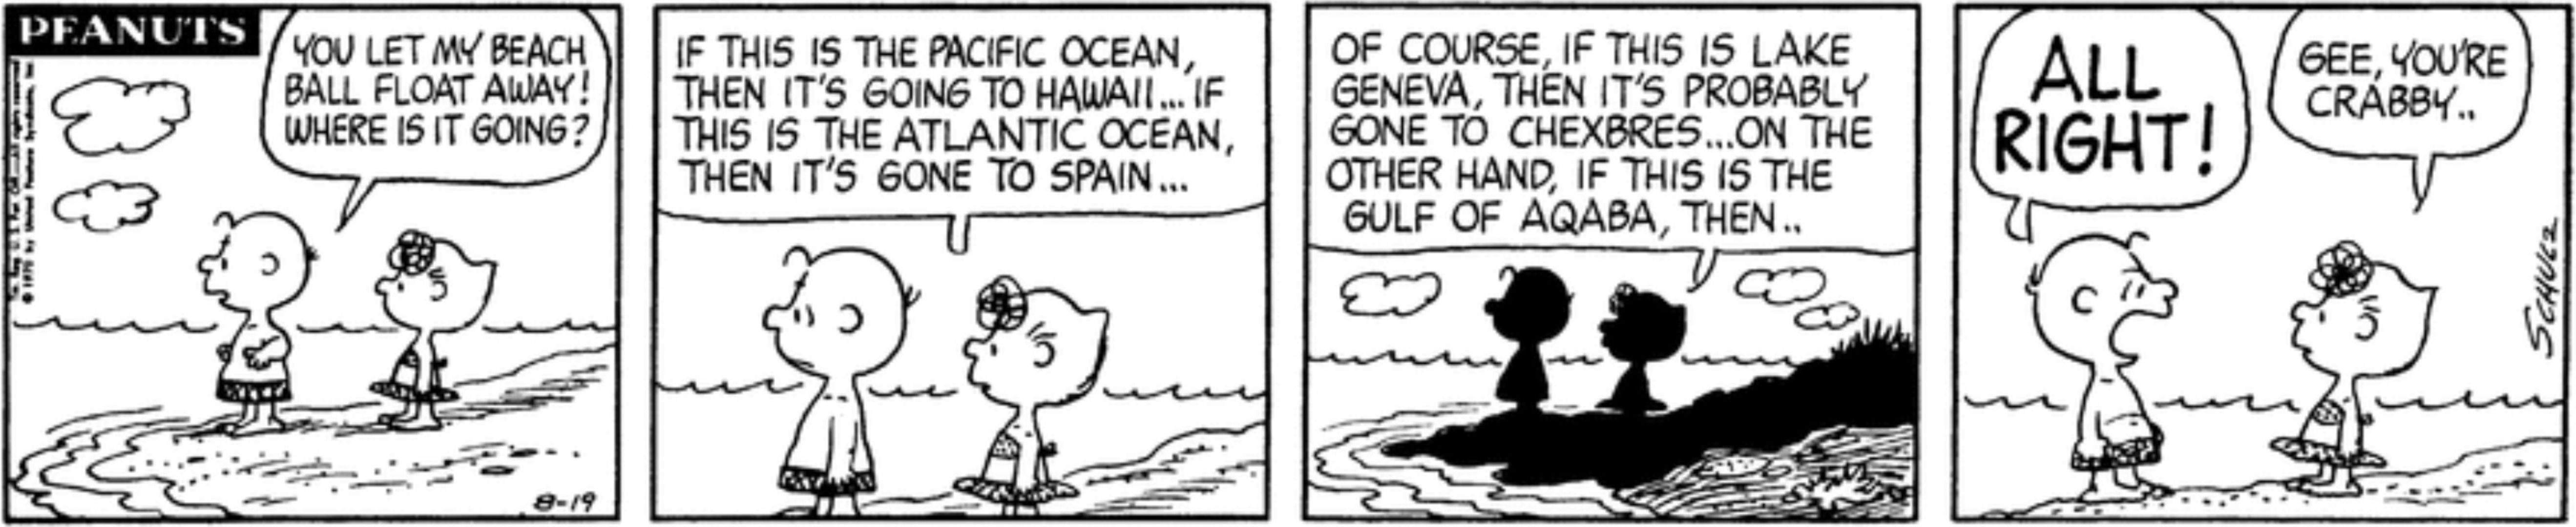 Charlie Brown and Sally at the beach in Peanuts.